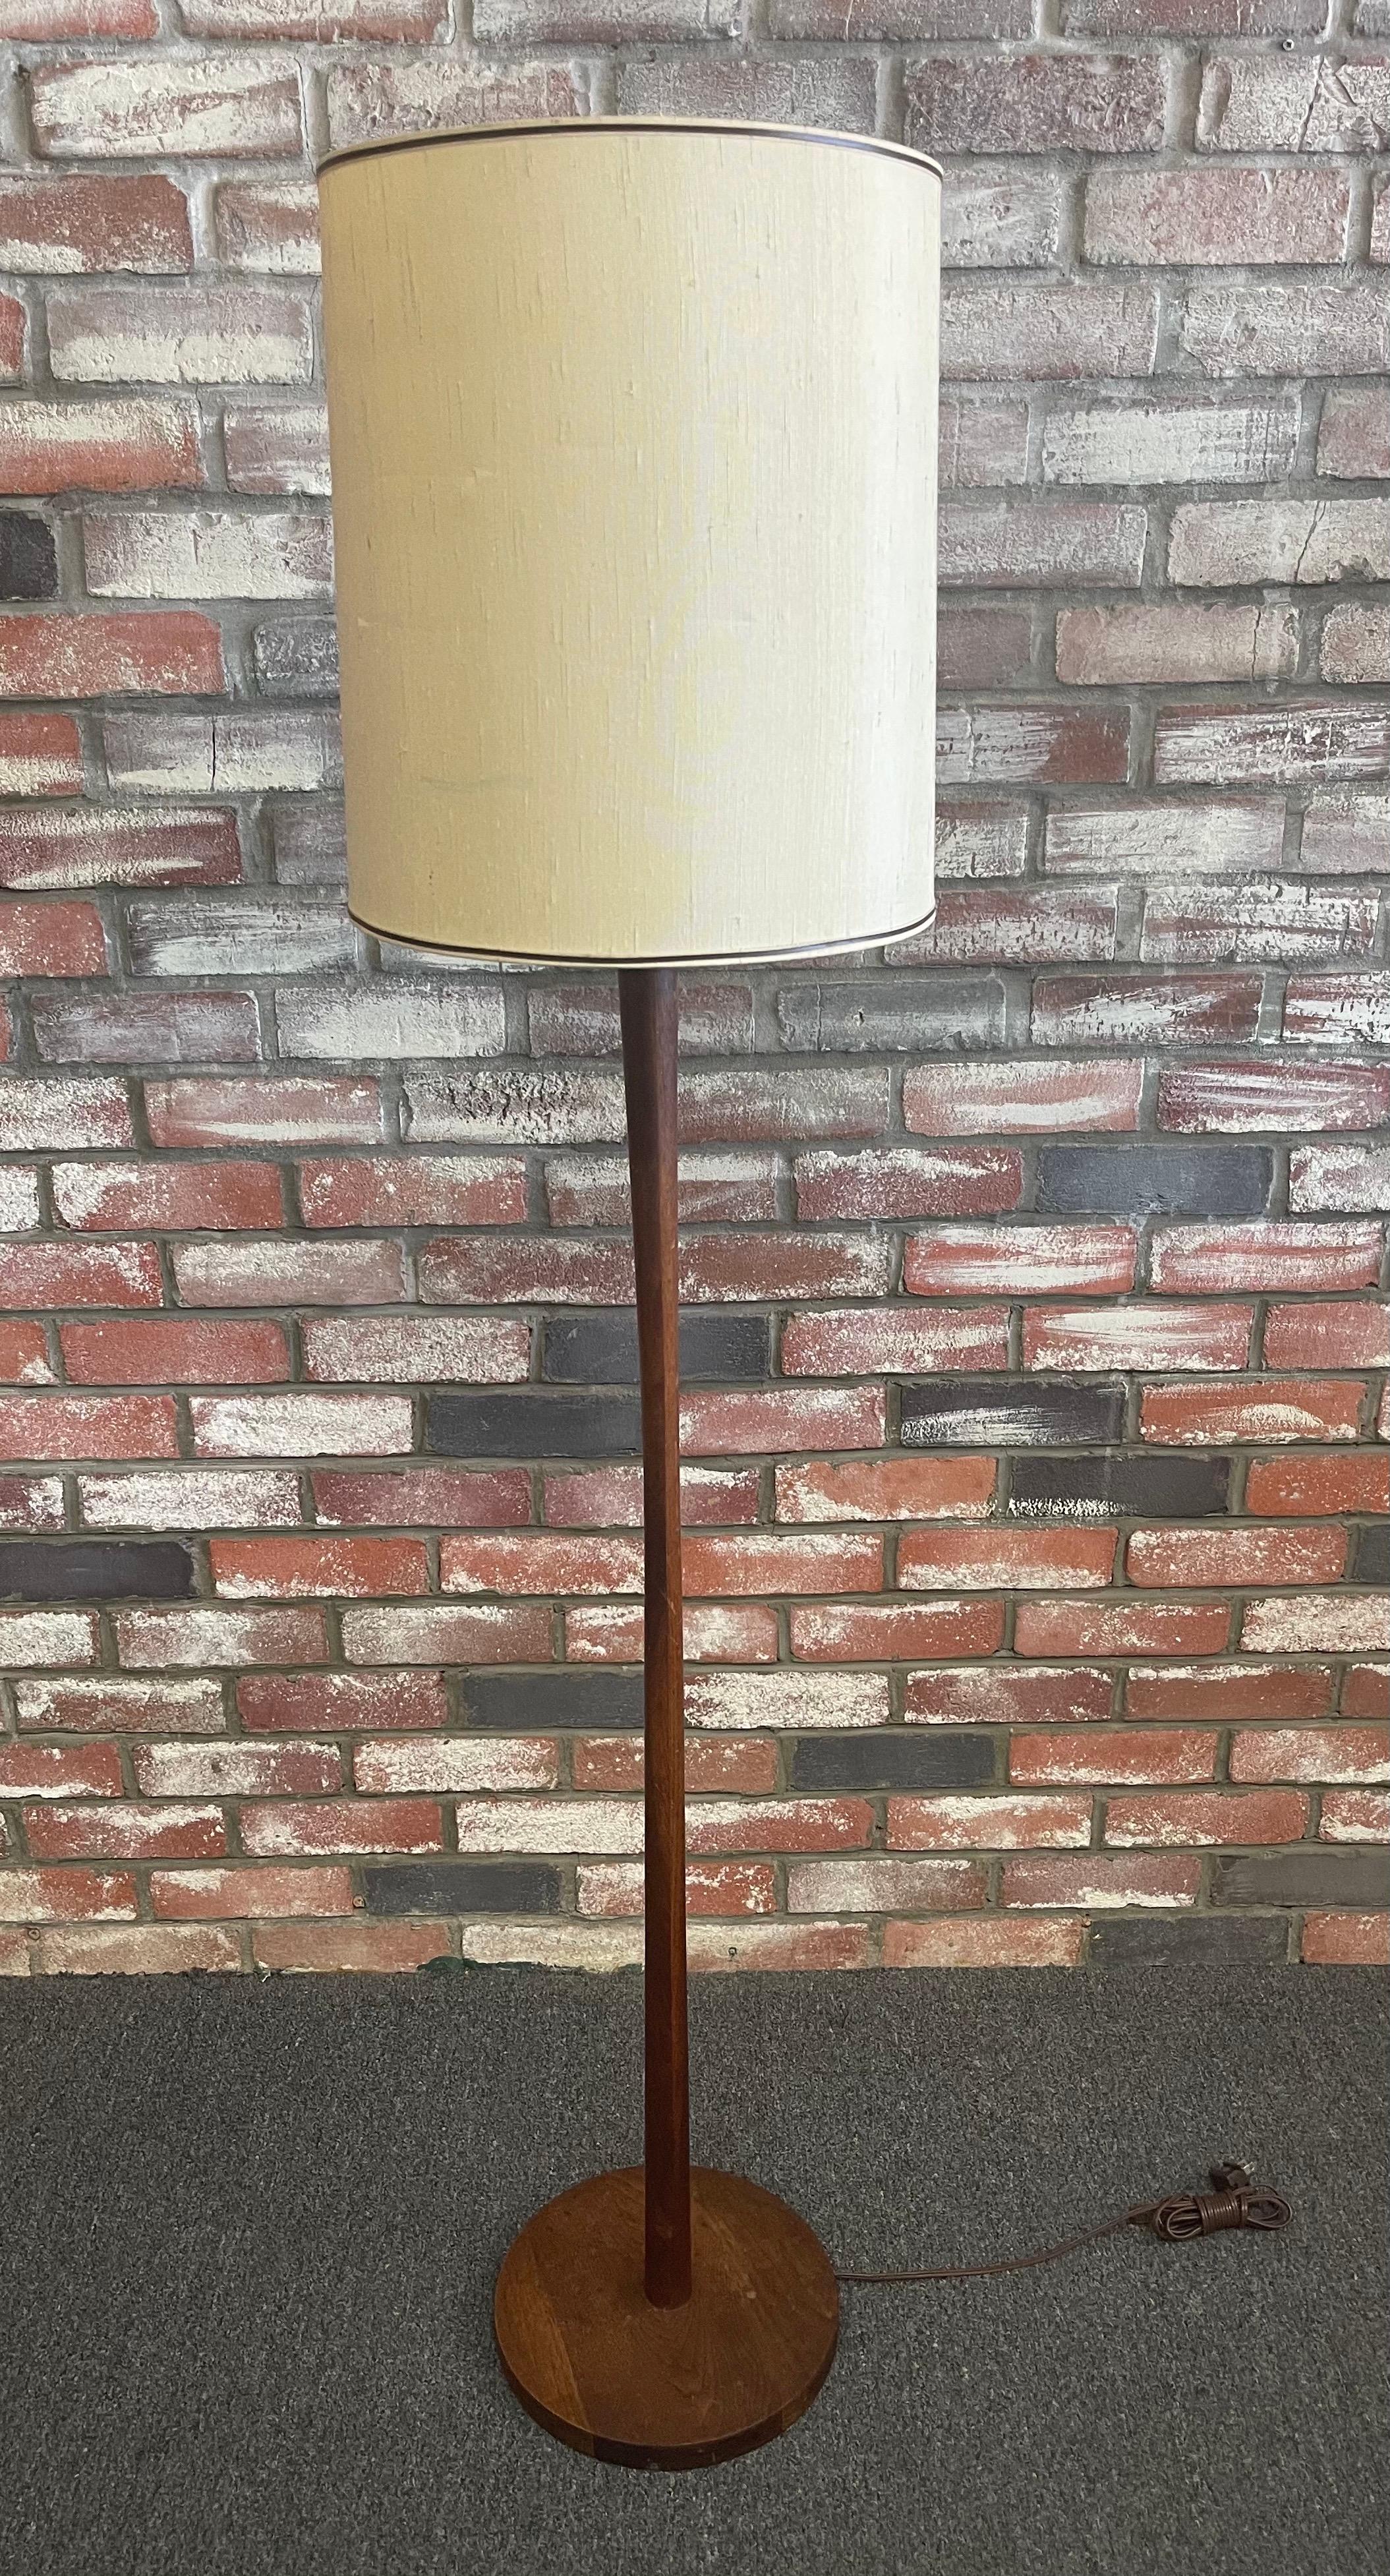 Mid-Century Modern walnut floor lamp with original shade, circa 1950s. The lamp is in good vintage condition and measures 60.5